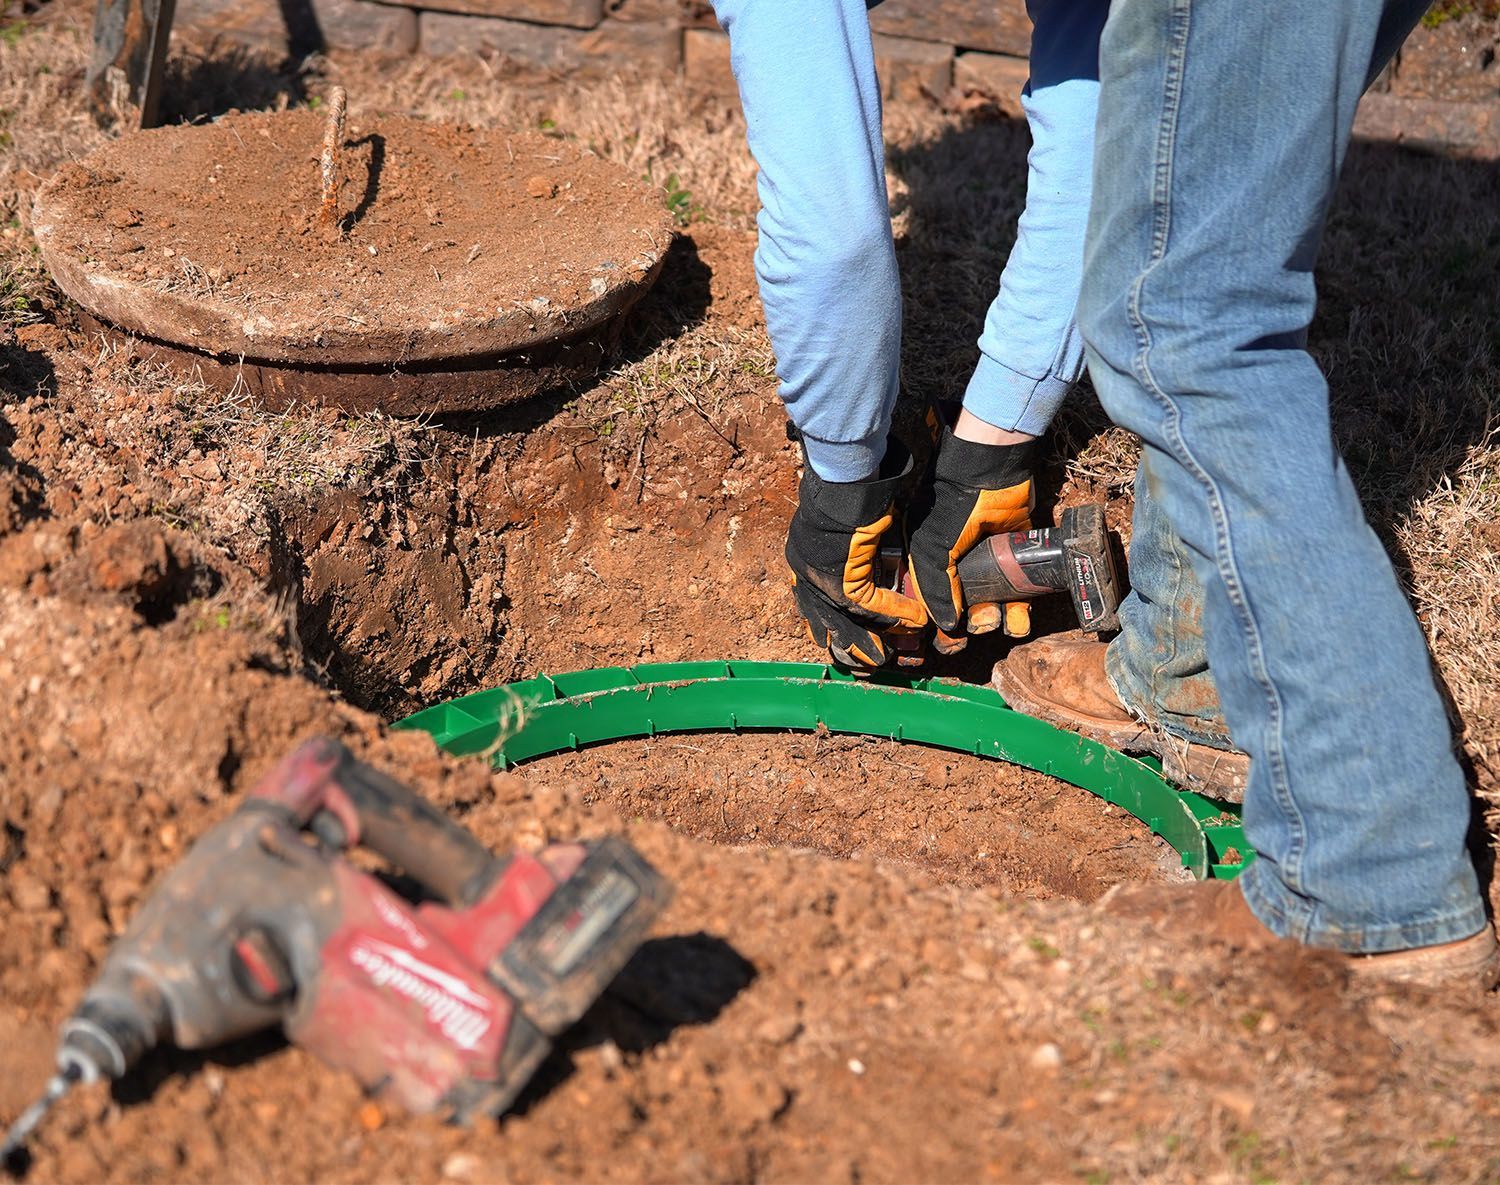 Crew member skillfully installing septic tank risers using a drill